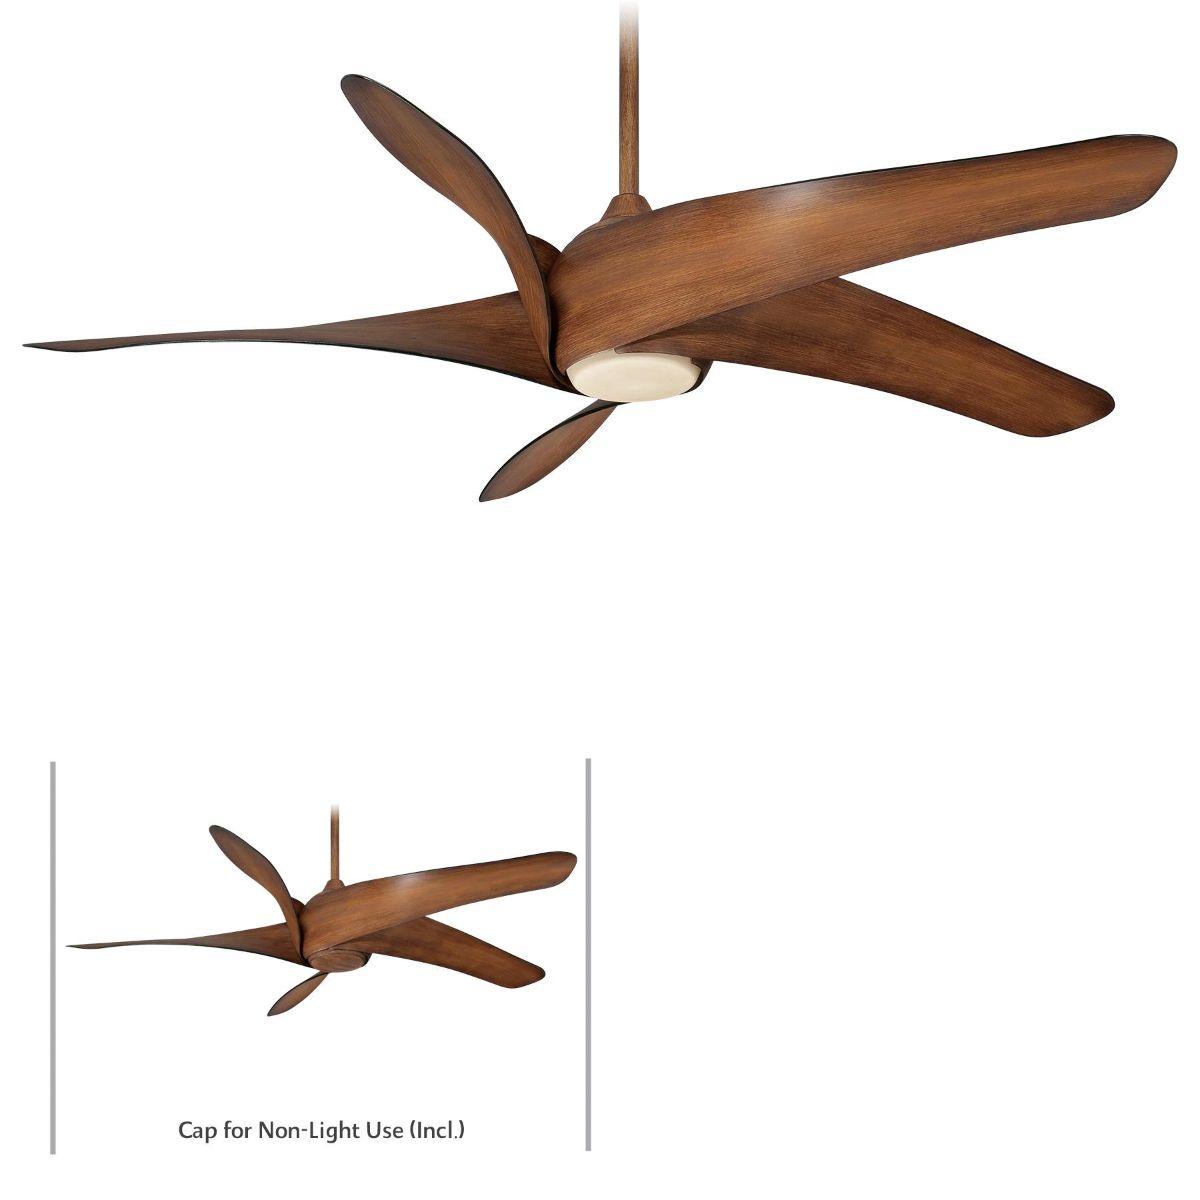 Artemis XL5 62 Inch Contemporary Propeller Ceiling Fan With Light And Remote